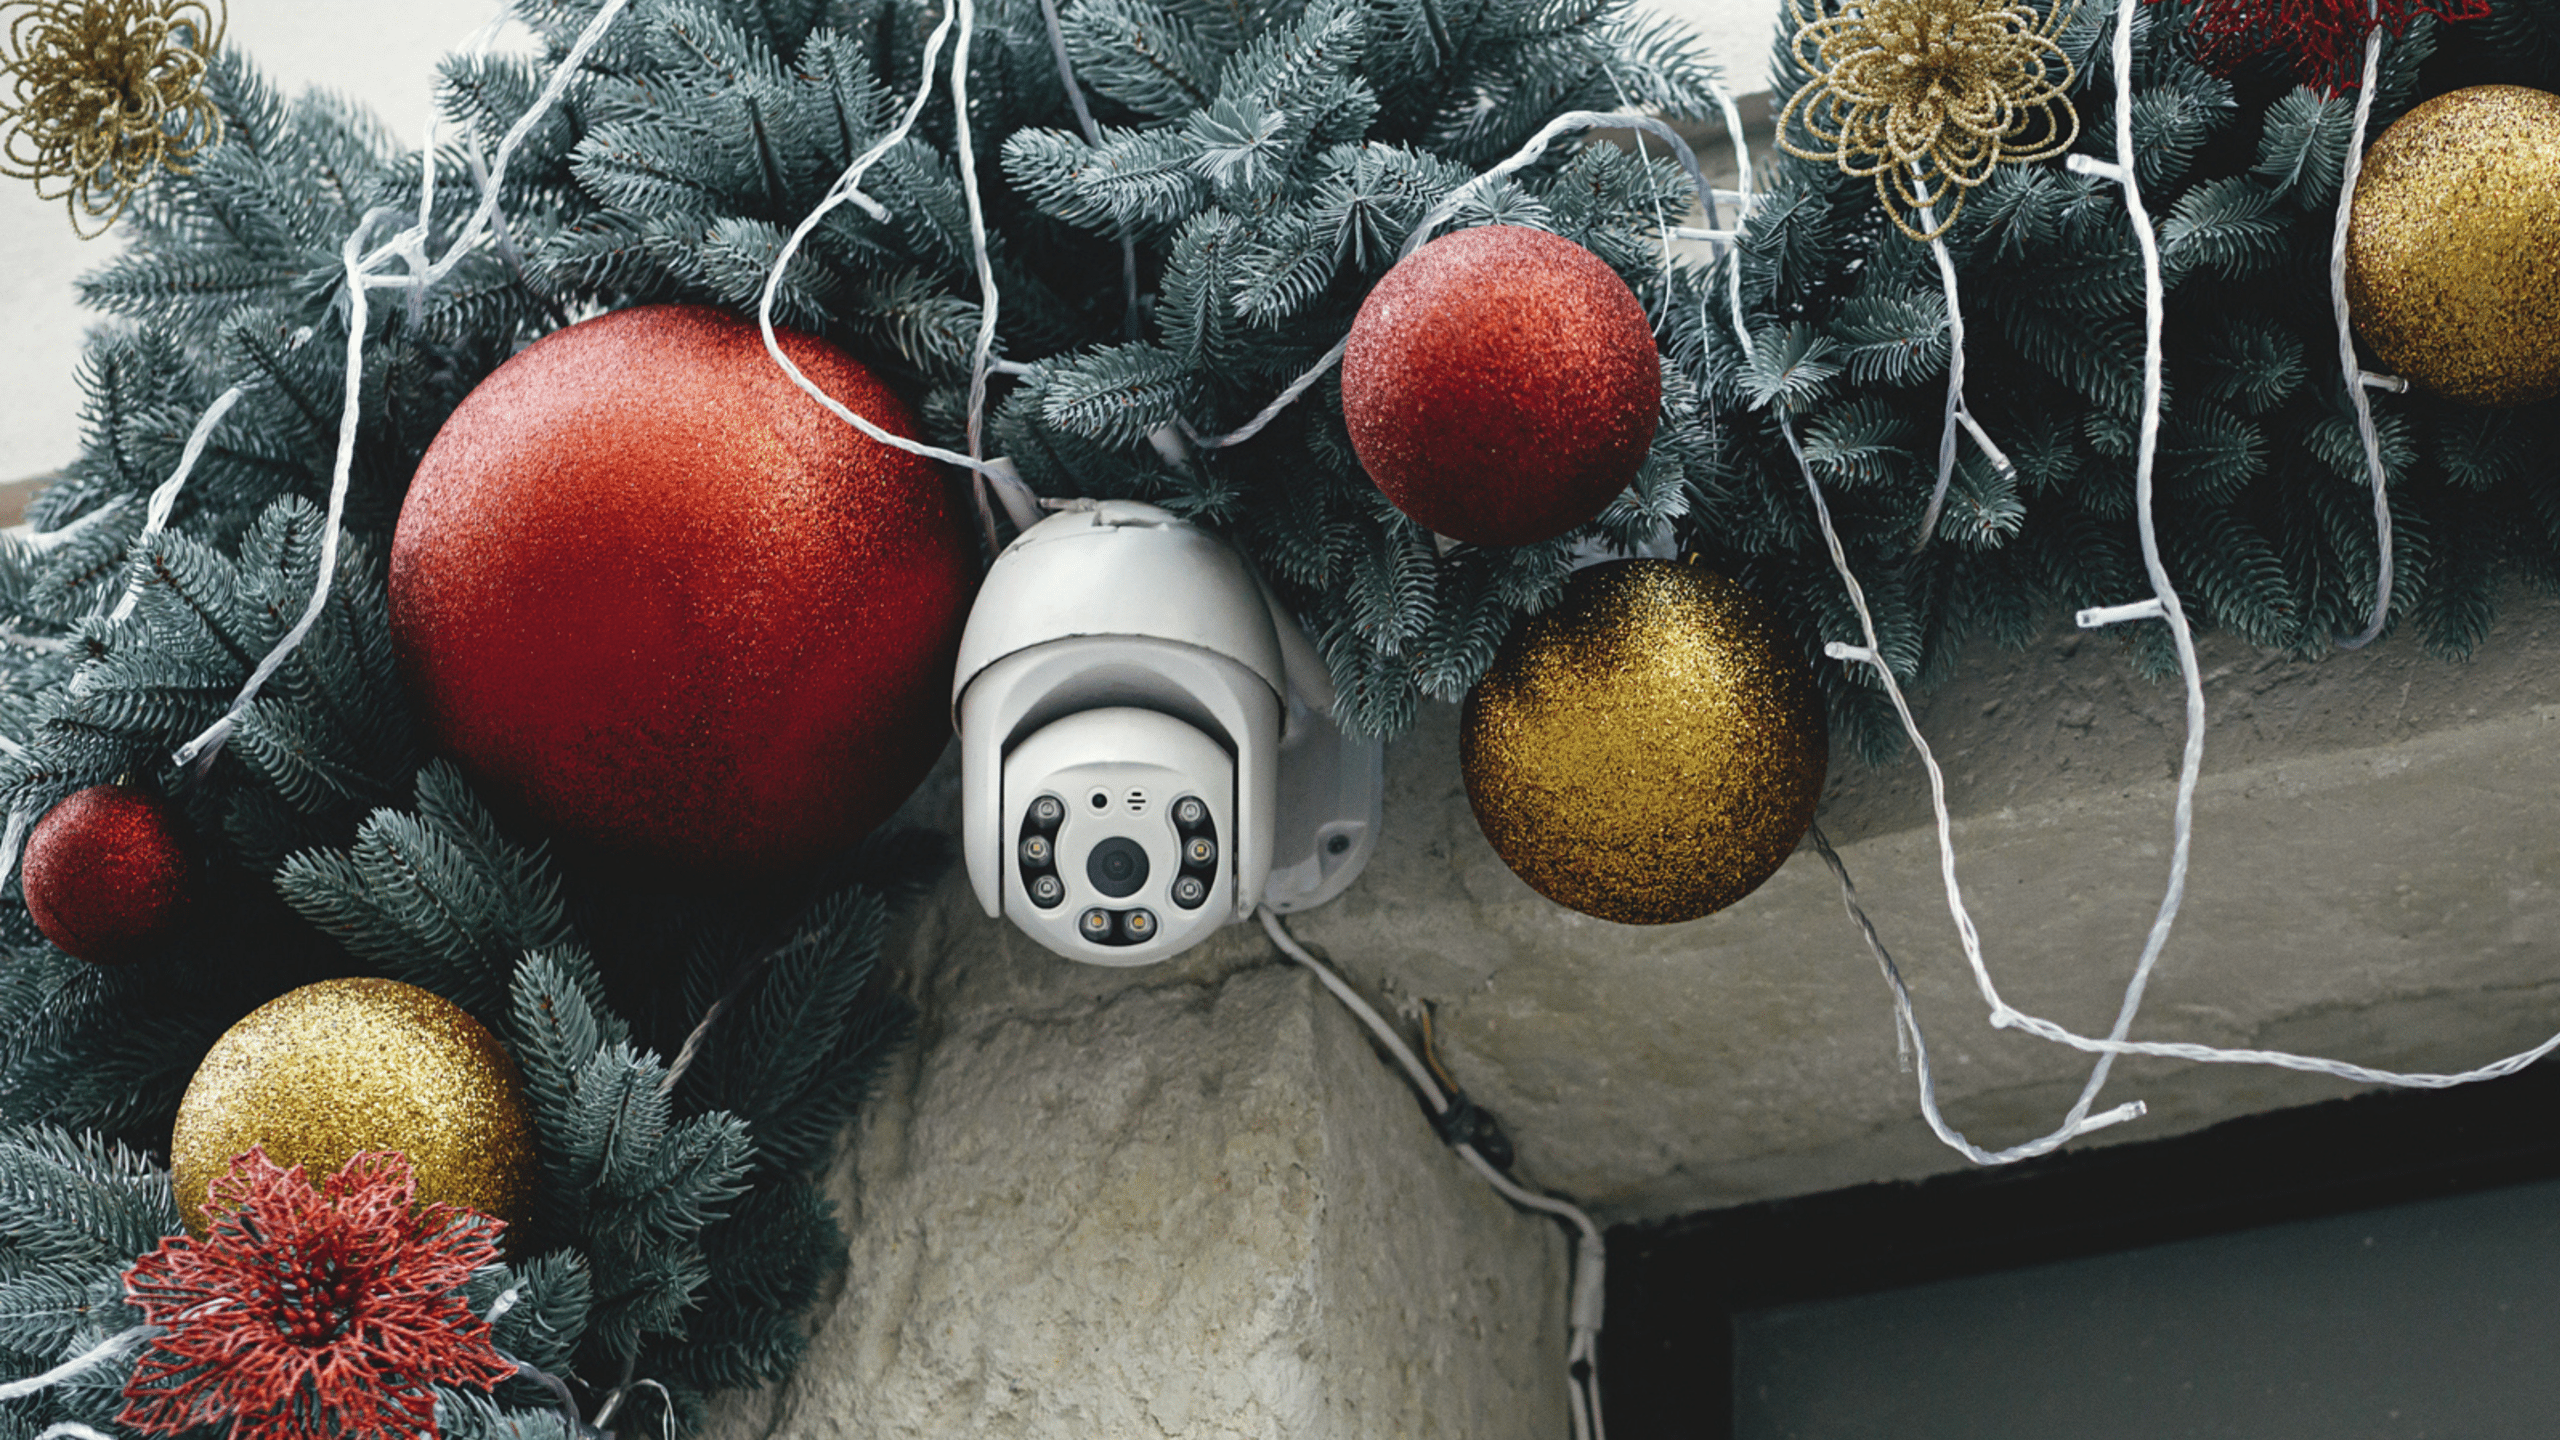 security camera on outside of home surrounded by christmas scenery